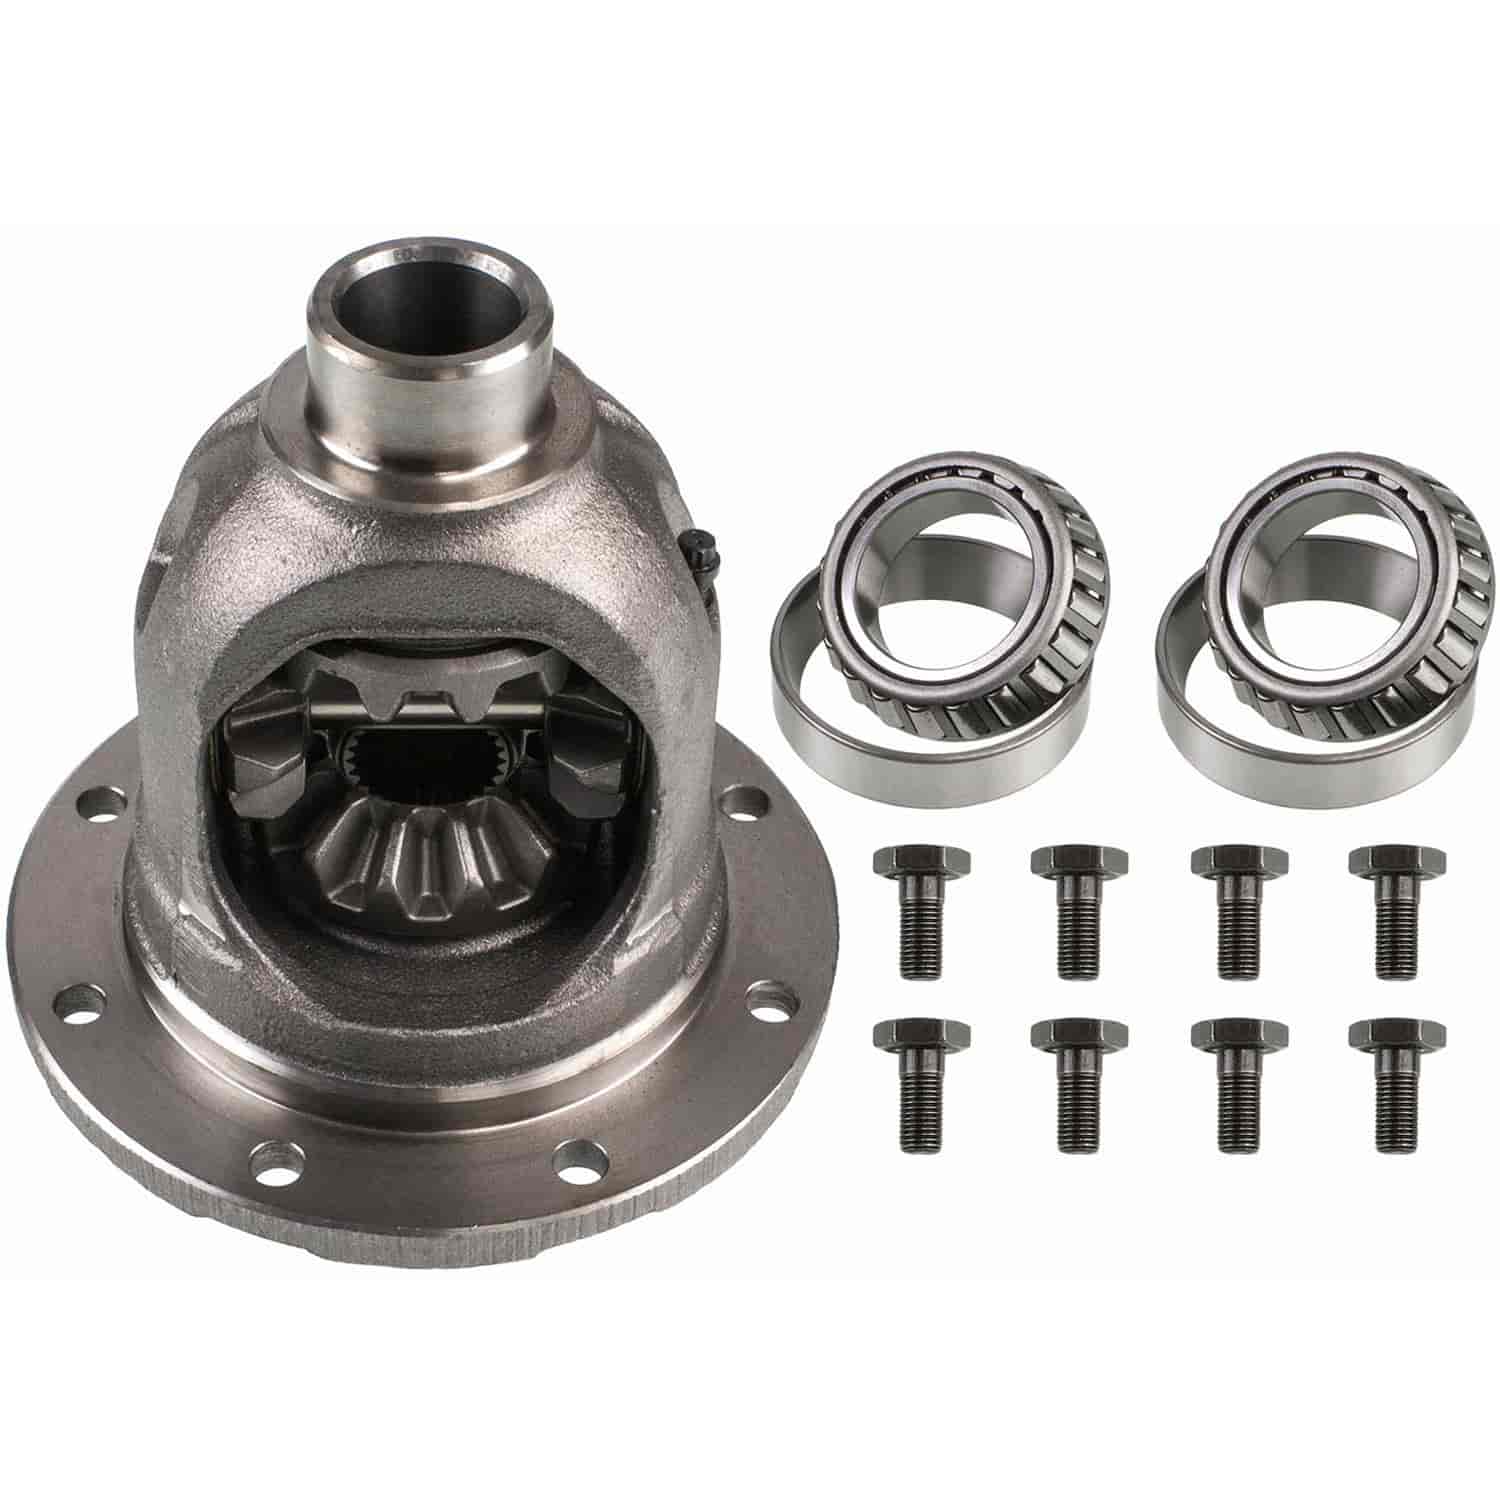 Differential Gear Case Kit 1.18 in. Dia. 27 Spline Incl. Internal Kit 3.54 Ratio And Up Open WJ Utility